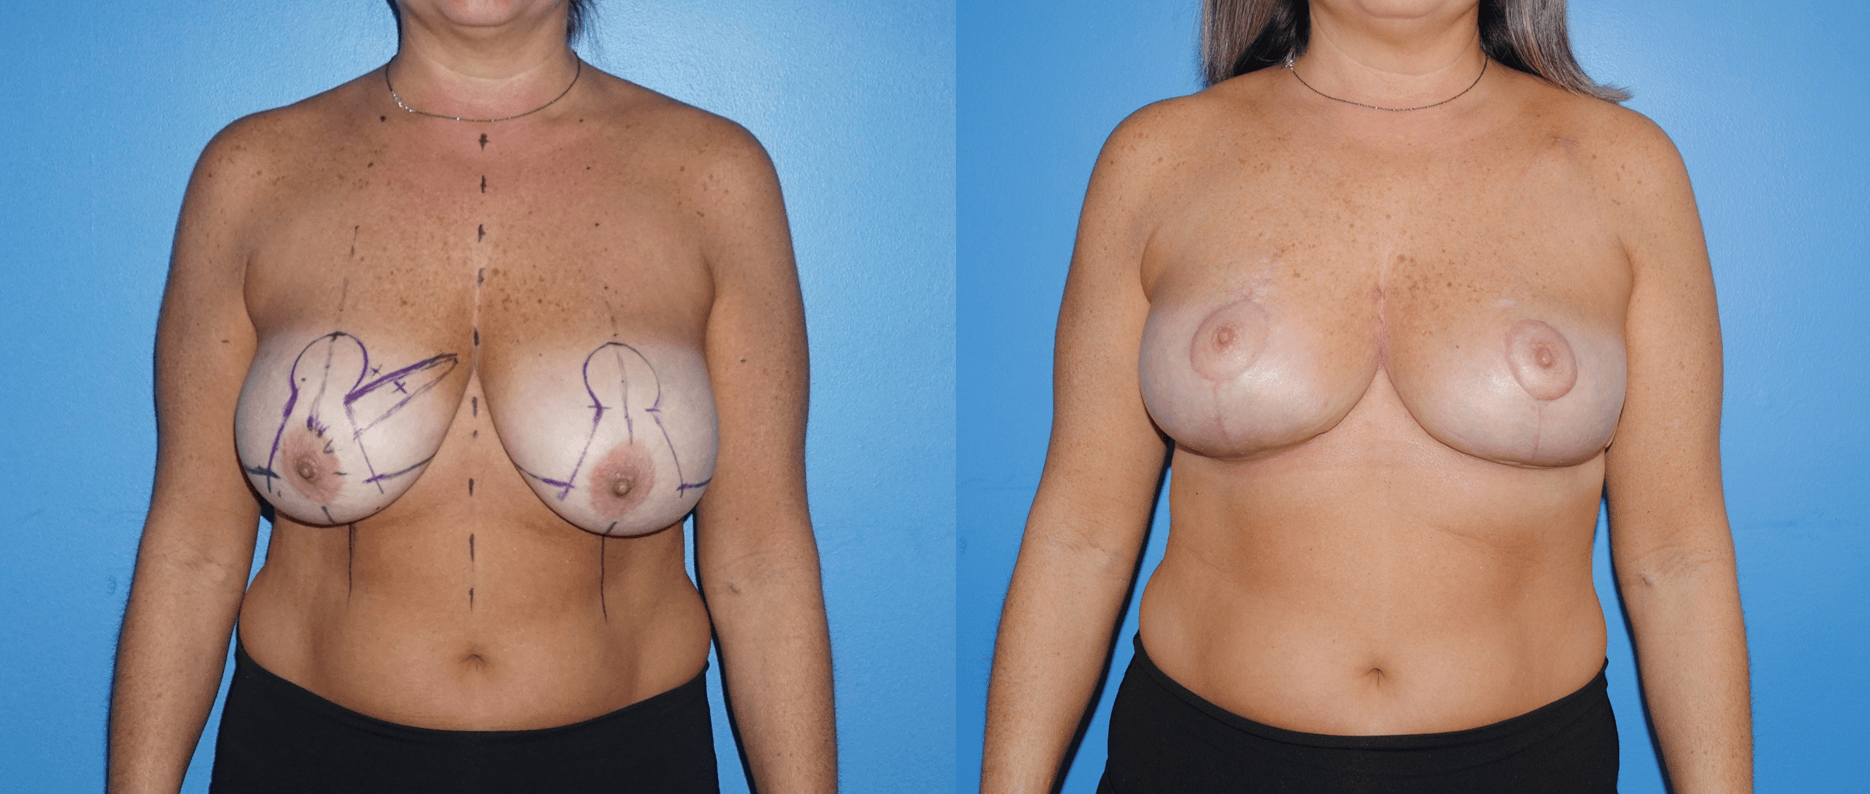 Oncoplastic Breast Reconstruction Following Lumpectomy